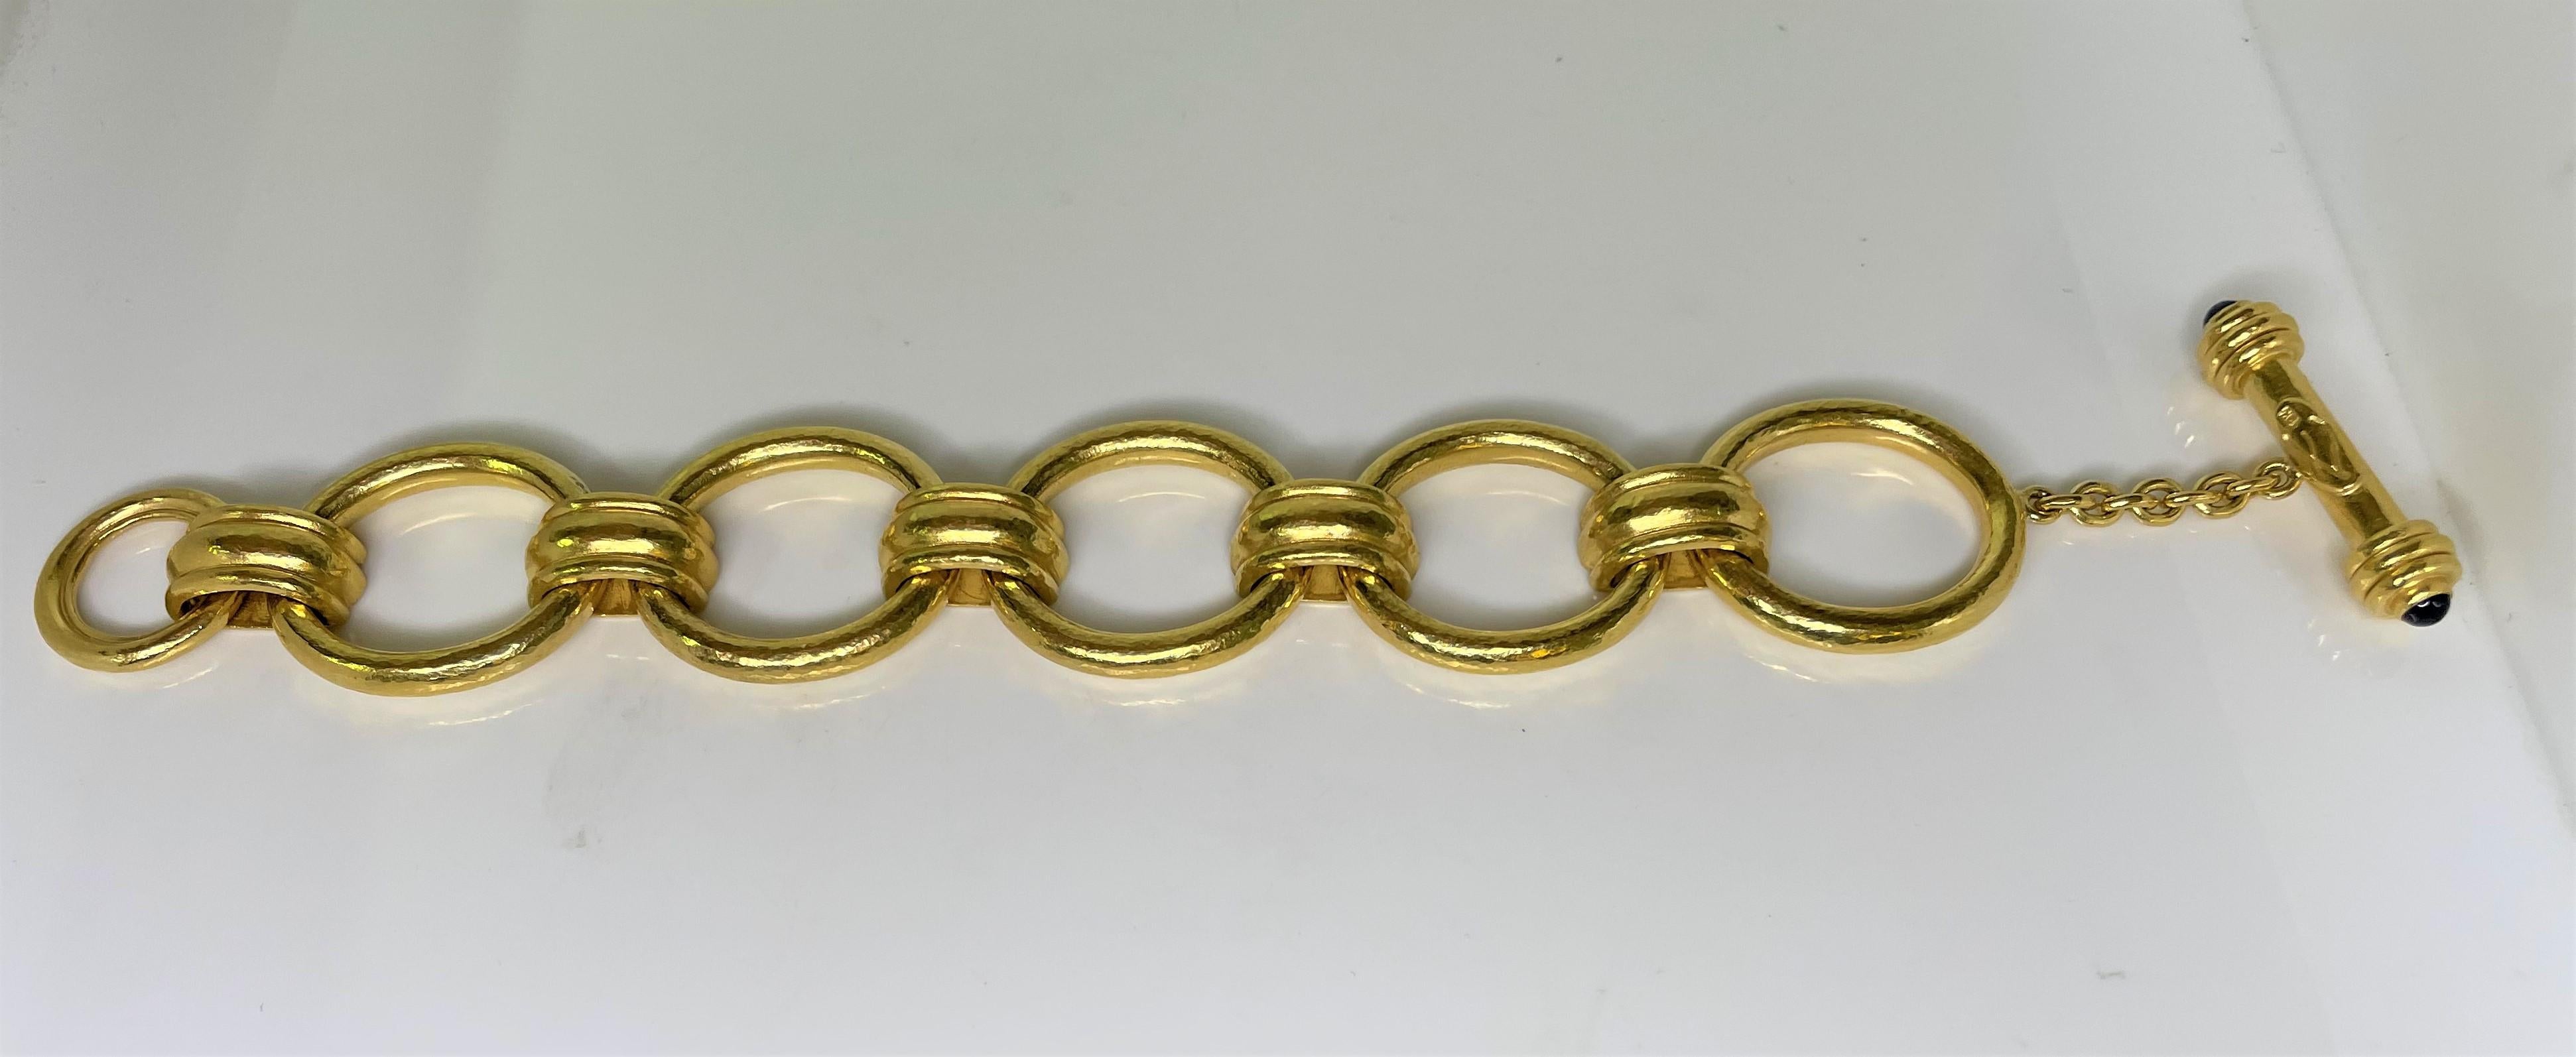 From designer Elizabeth Locke, 19 karat solid hammered style gold link bracelet with toggle.  
Toggle has a cabochon sapphire at each end. 
Stamped with designer trademark.
Bracelet is approximately 7.5 inches long. 
Links are approximately 1 inch